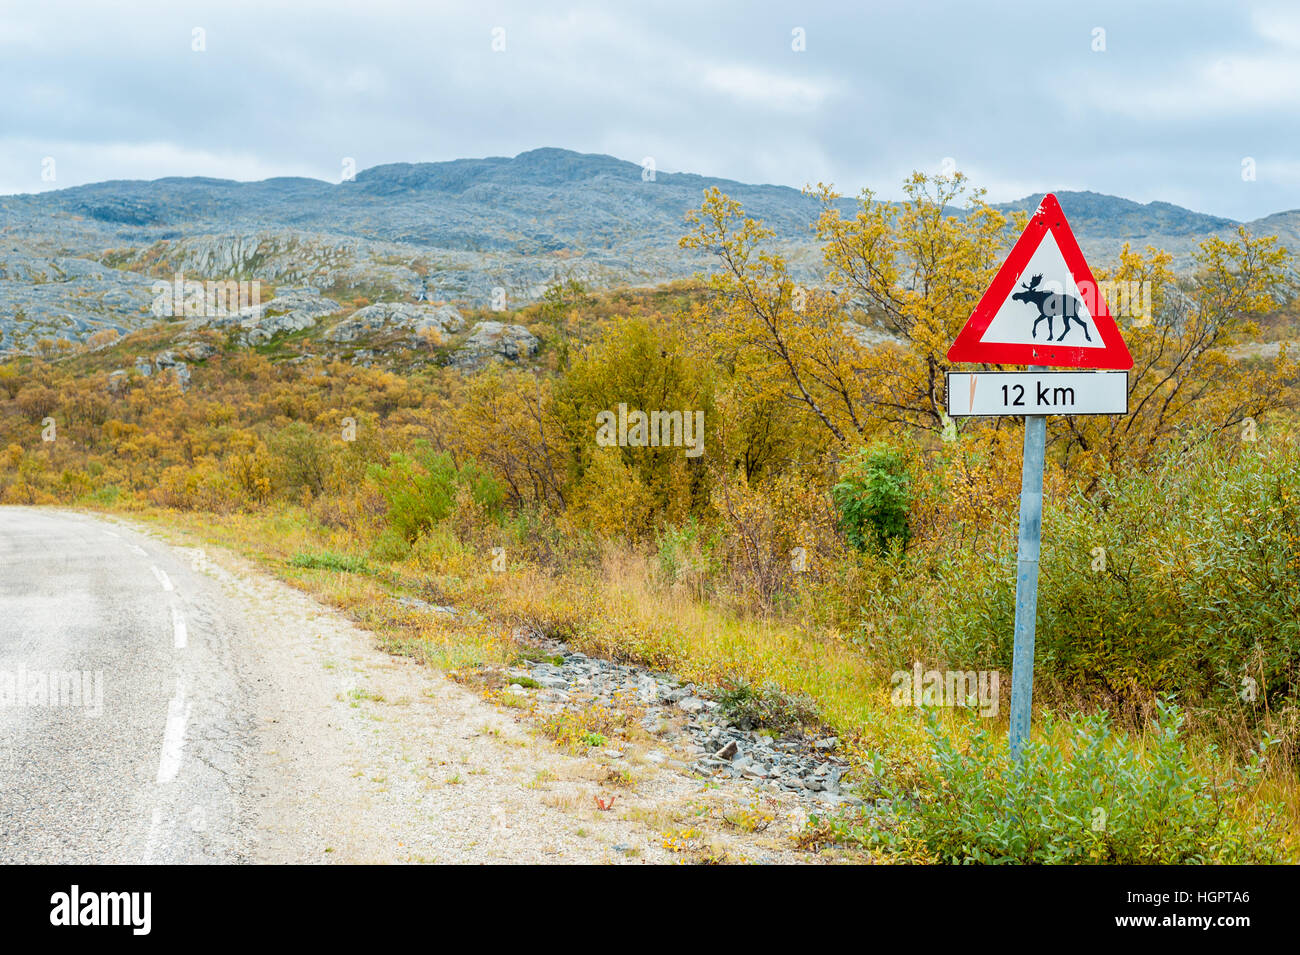 Empty road with traffic signal warning about possible reindeer crossing Stock Photo